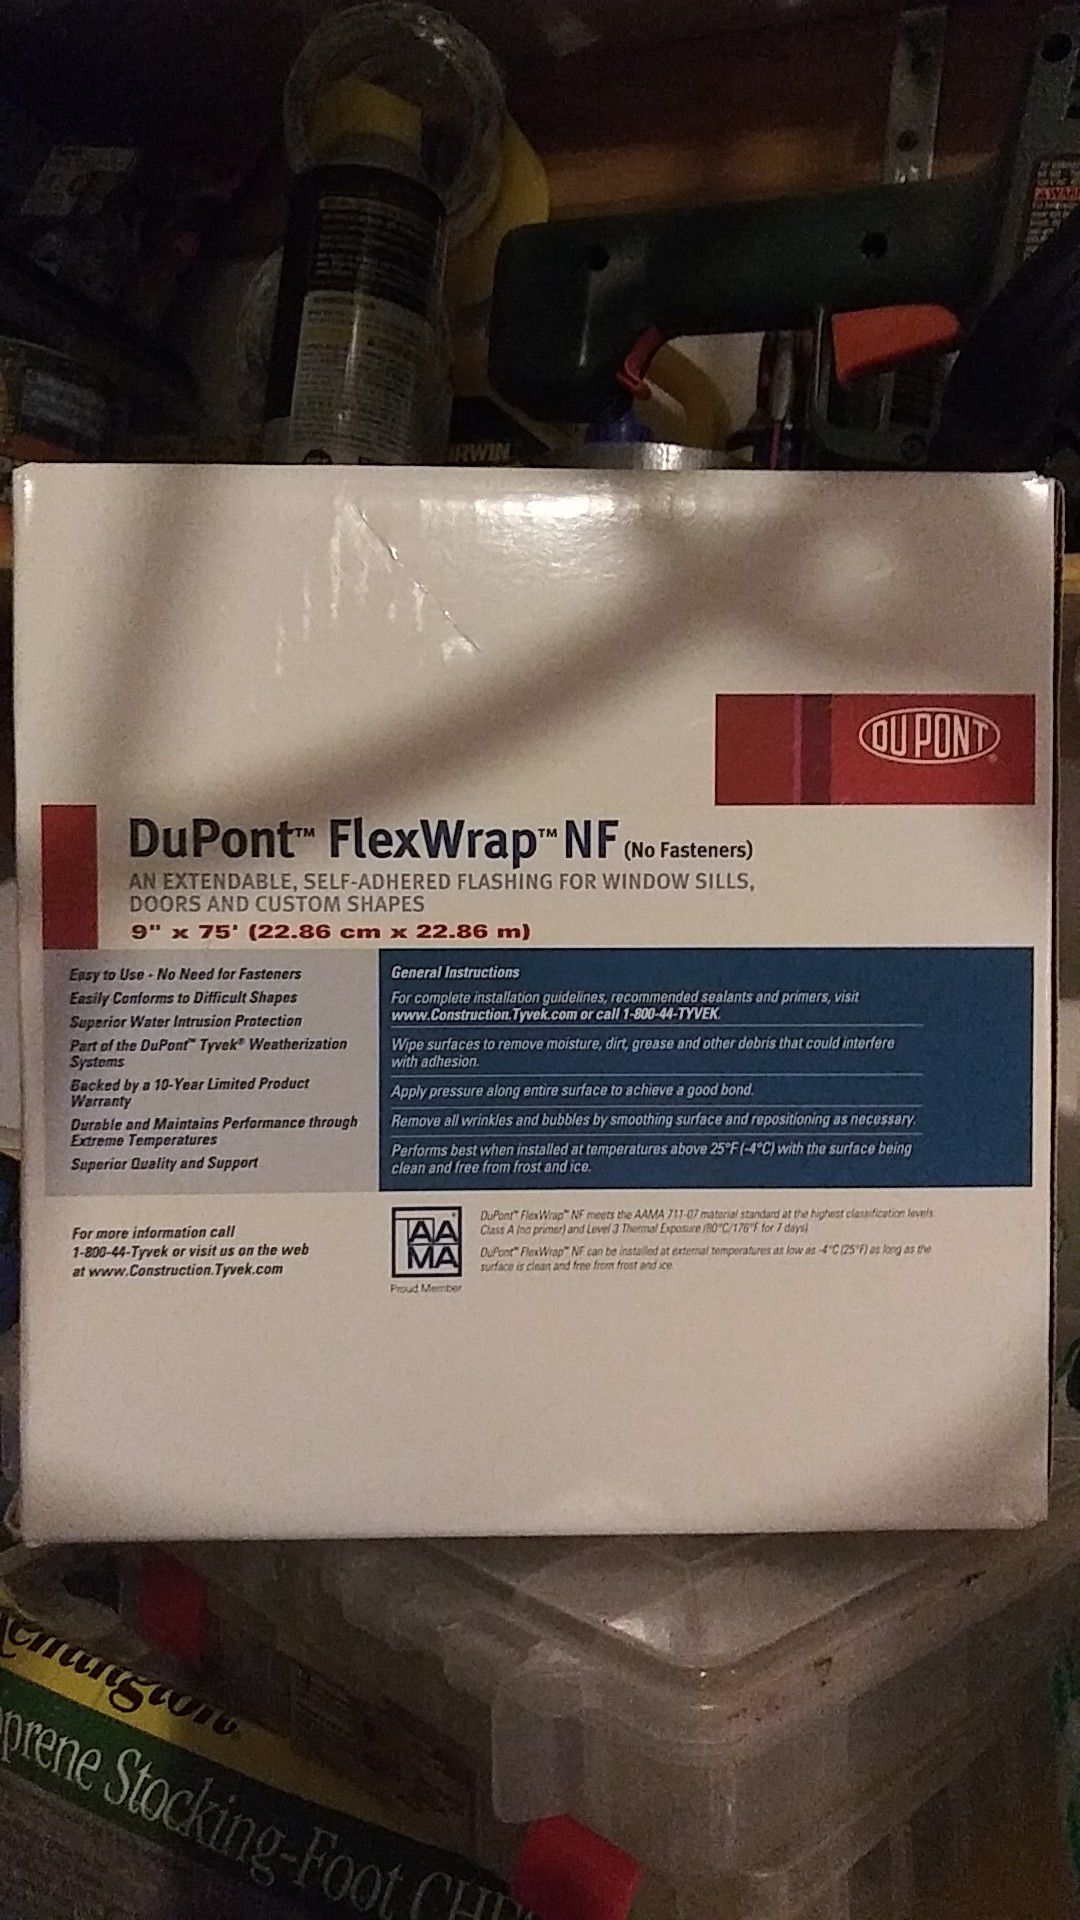 Dupont FlexWrap NF, 9"x 75' flashing, extendable peel and stick. Conforms to difficult shapes